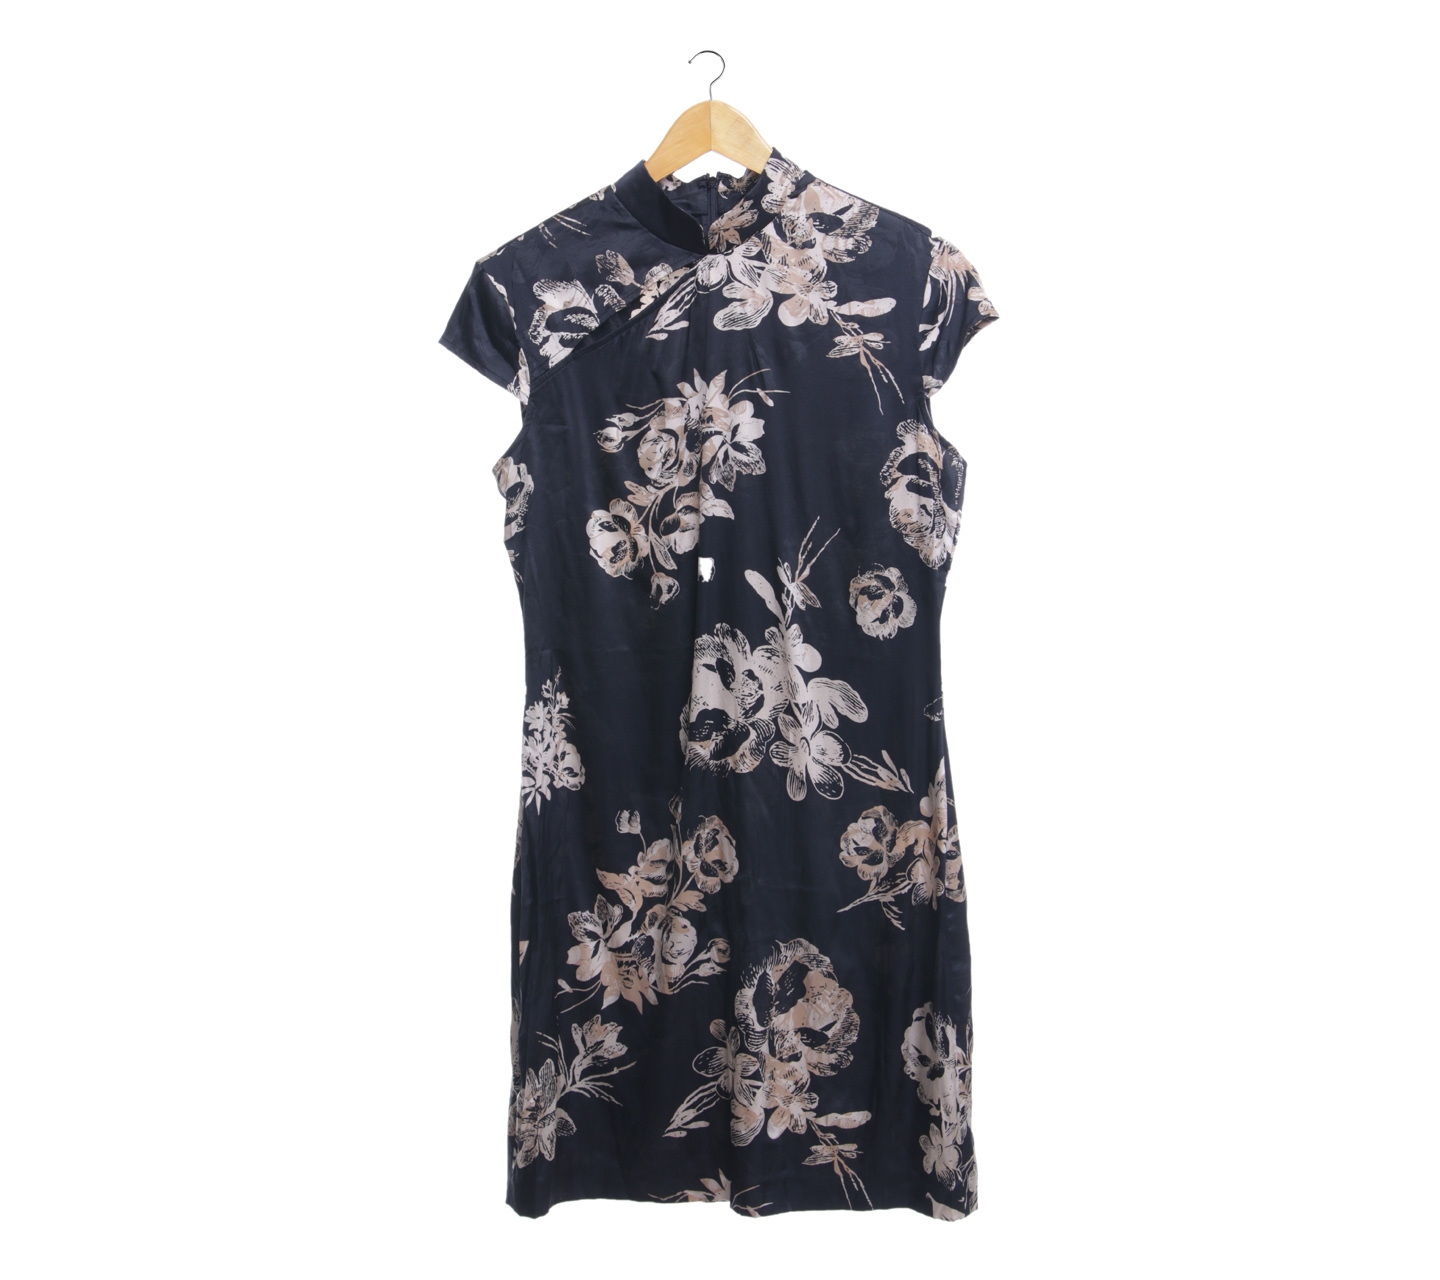 Guess Collection Black Floral Mini Dress